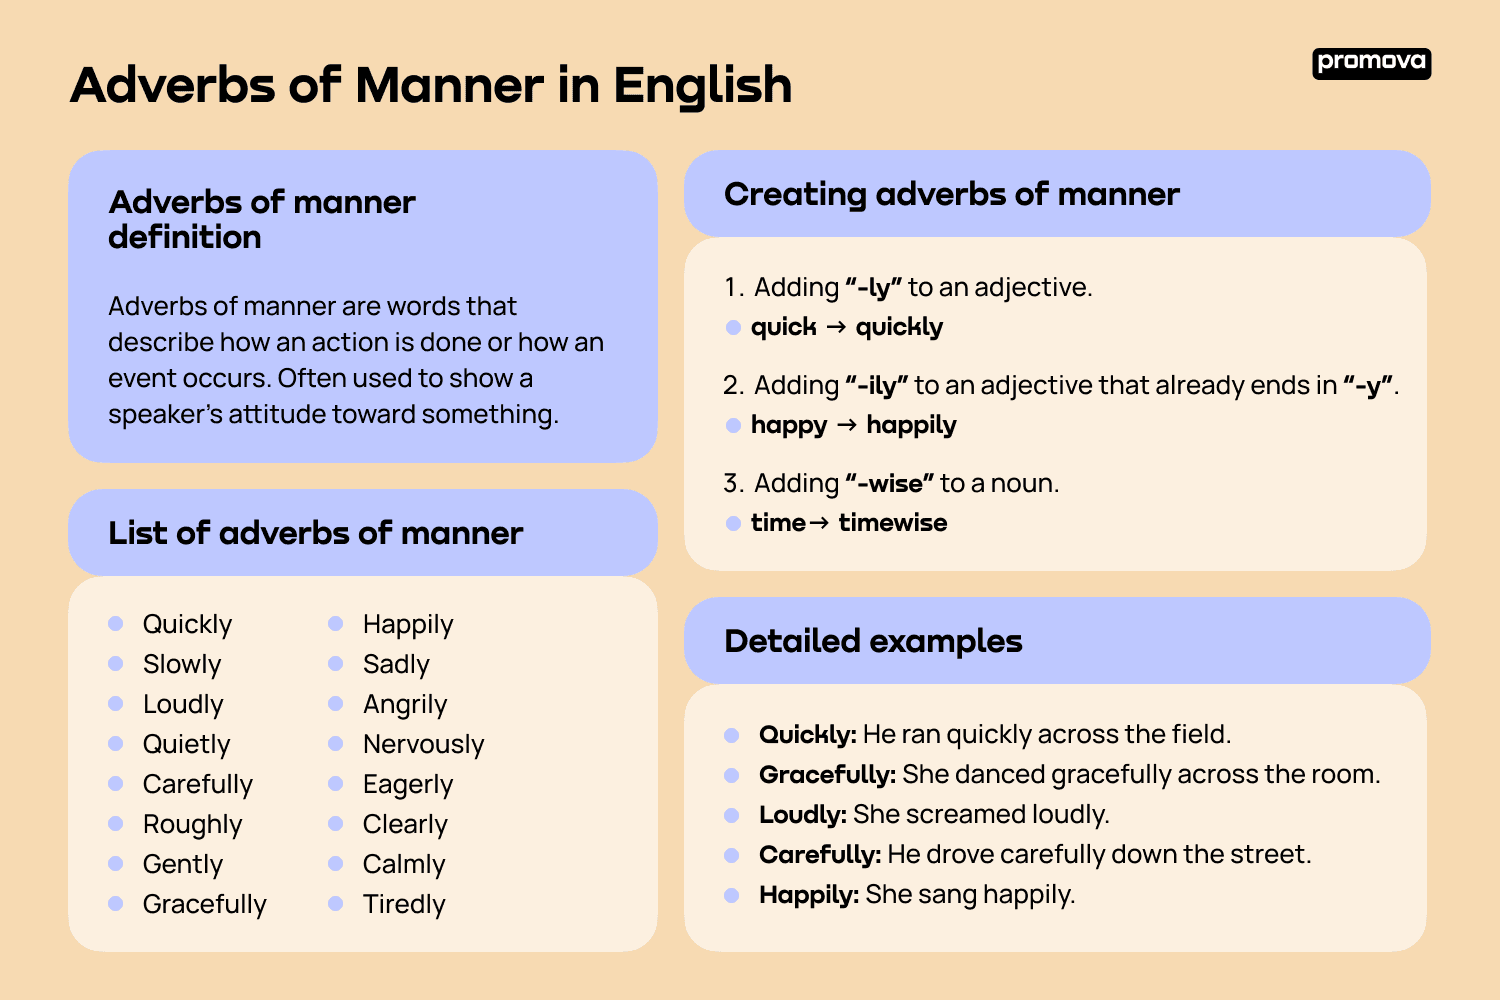 Adverbs of manner in English